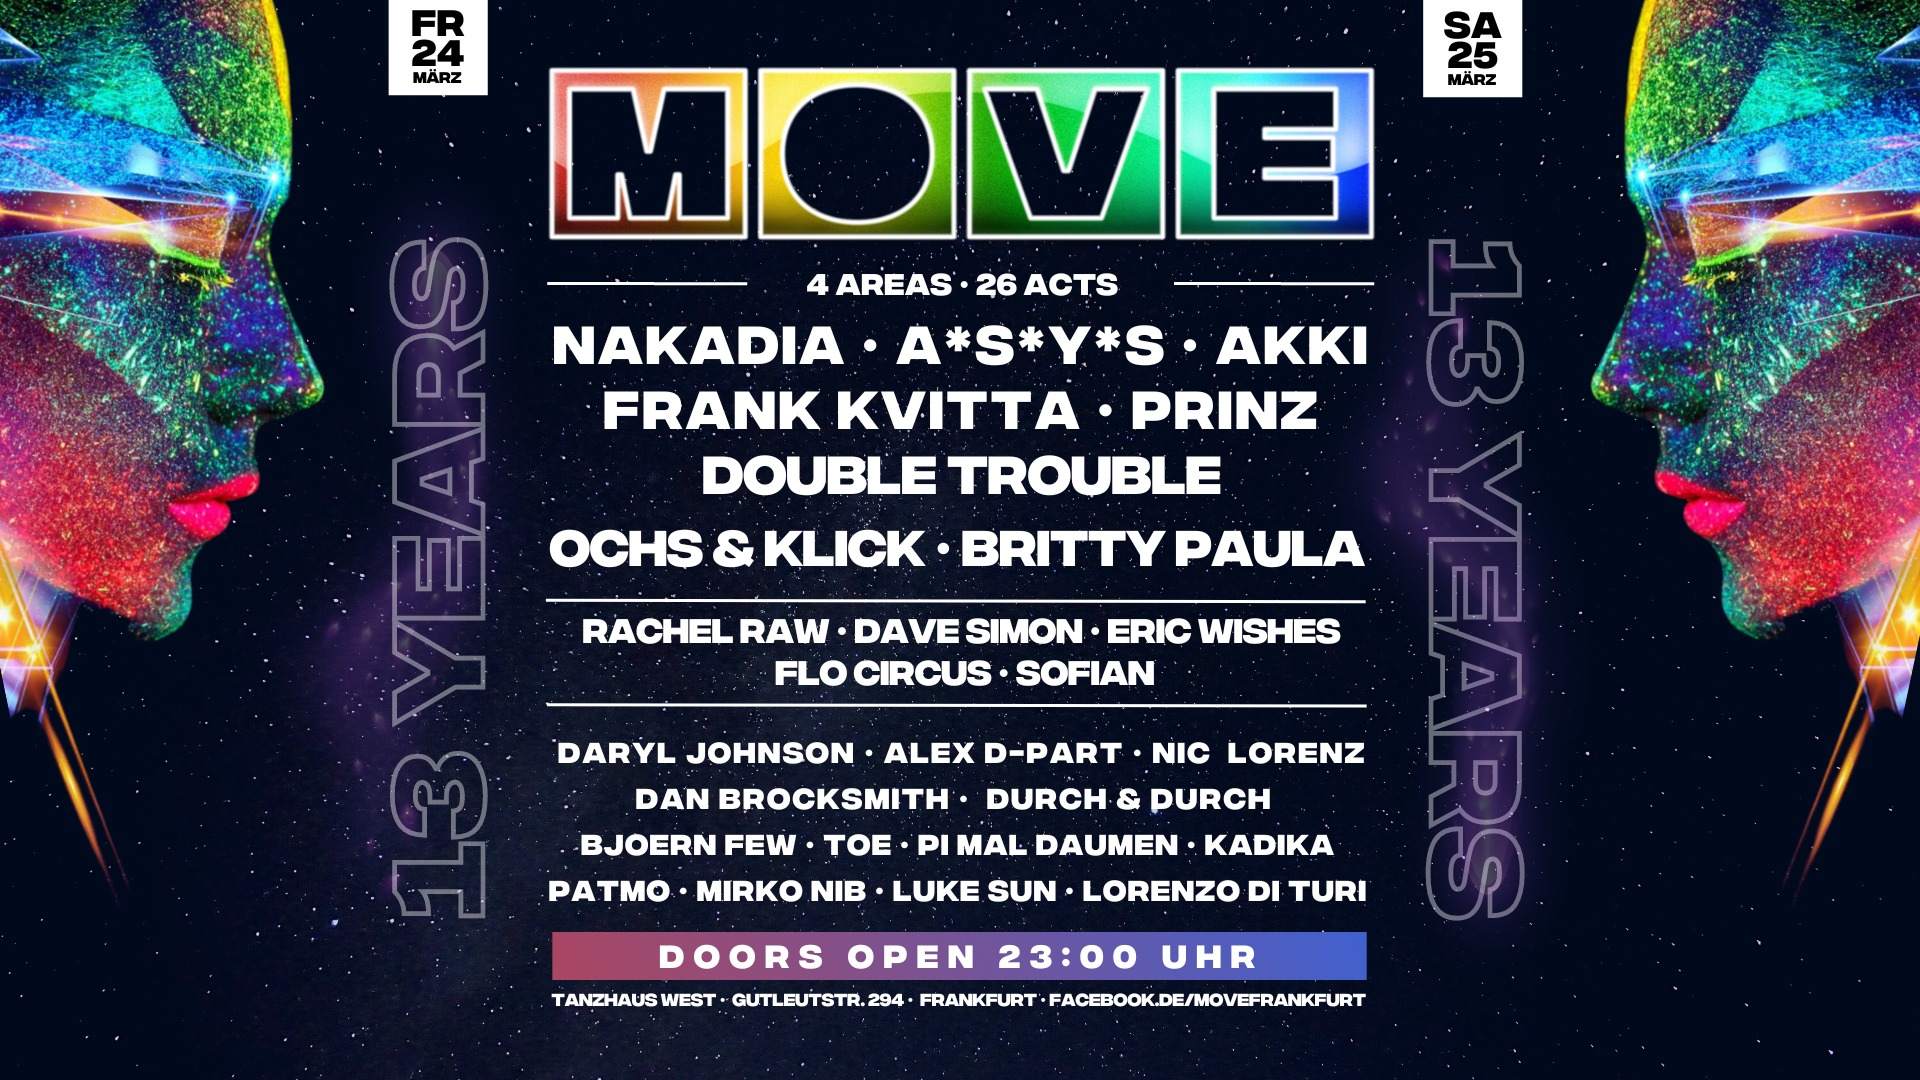 MOVE - 13 Years - 2 Days Weekend Indoor Festival - フライヤー表